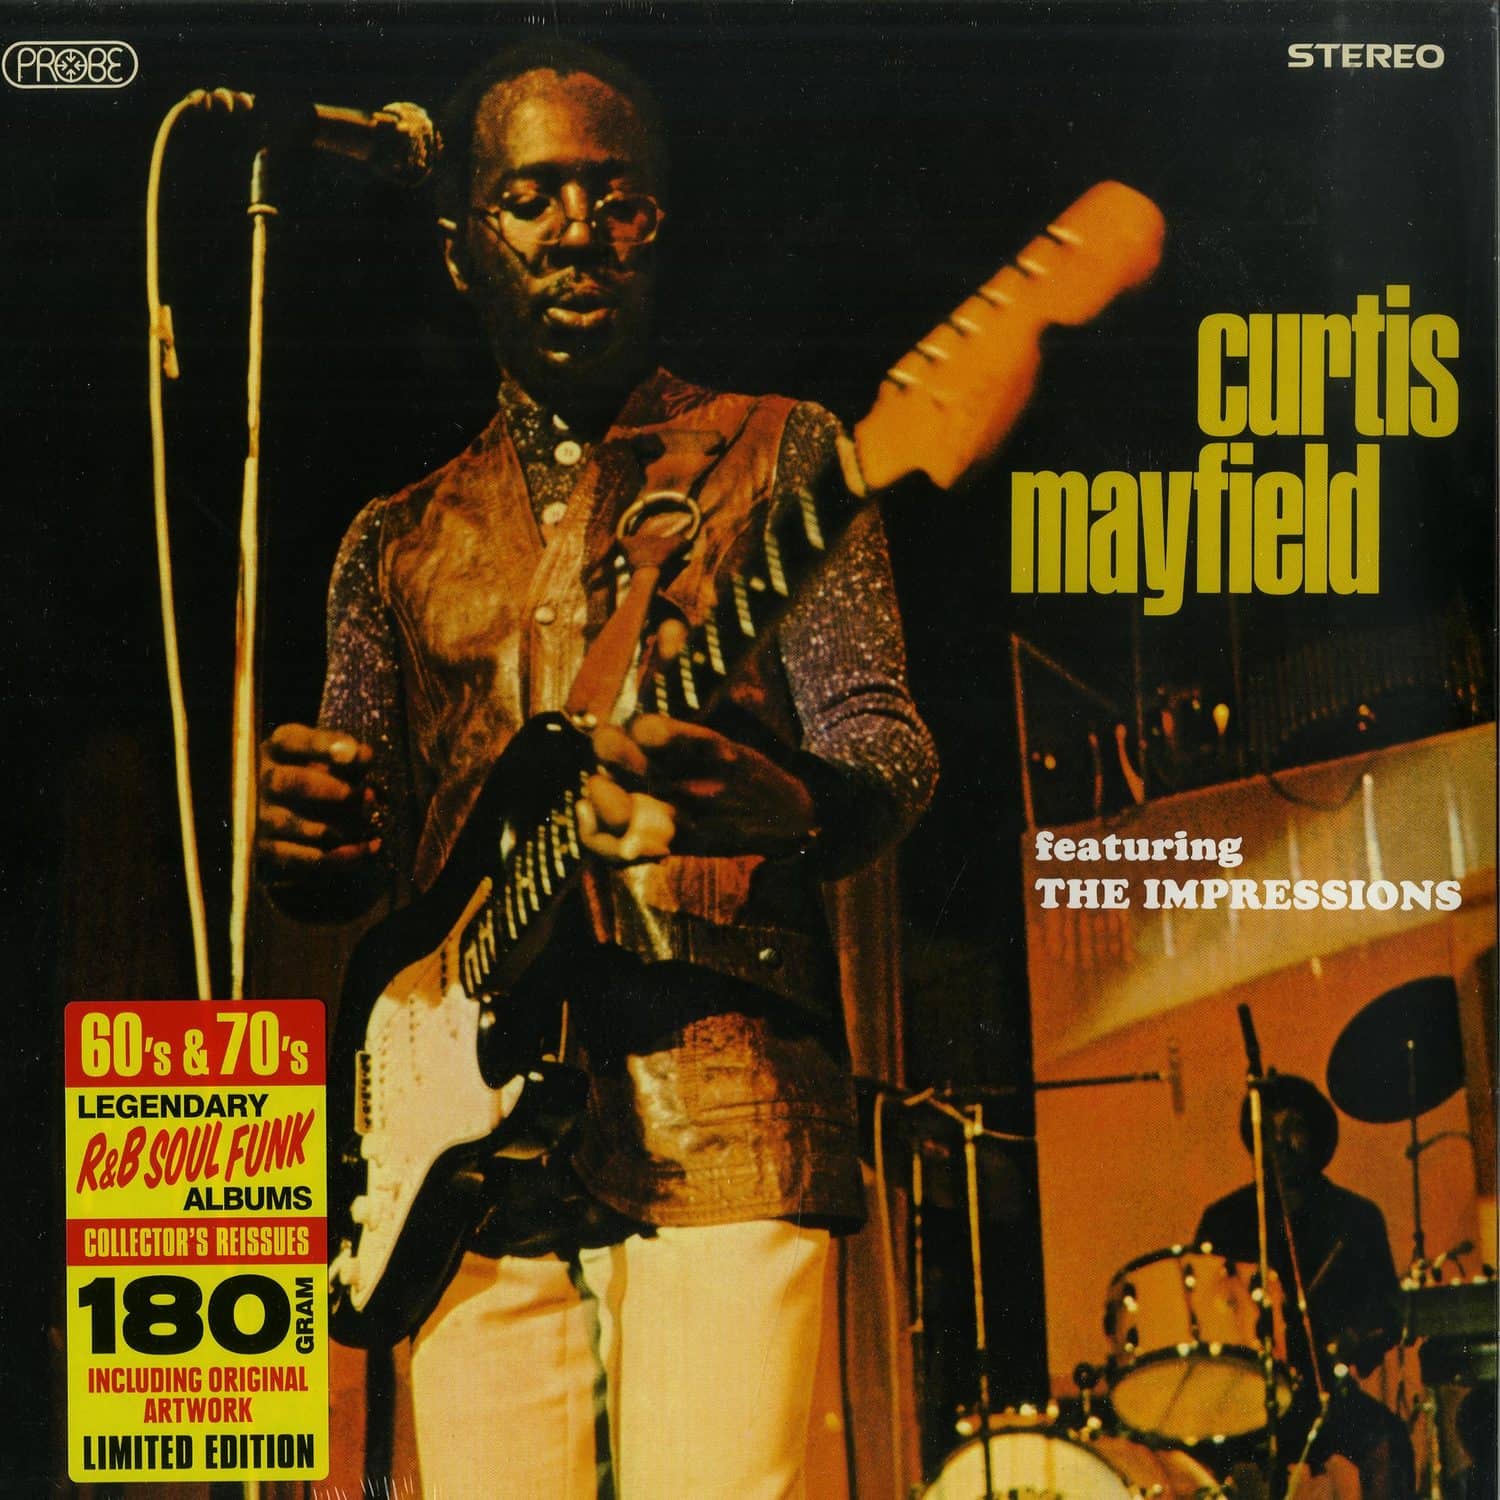 Curtis Mayfield - CURTIS MAYFIELD FEATURING THE IMPRESSIONS 